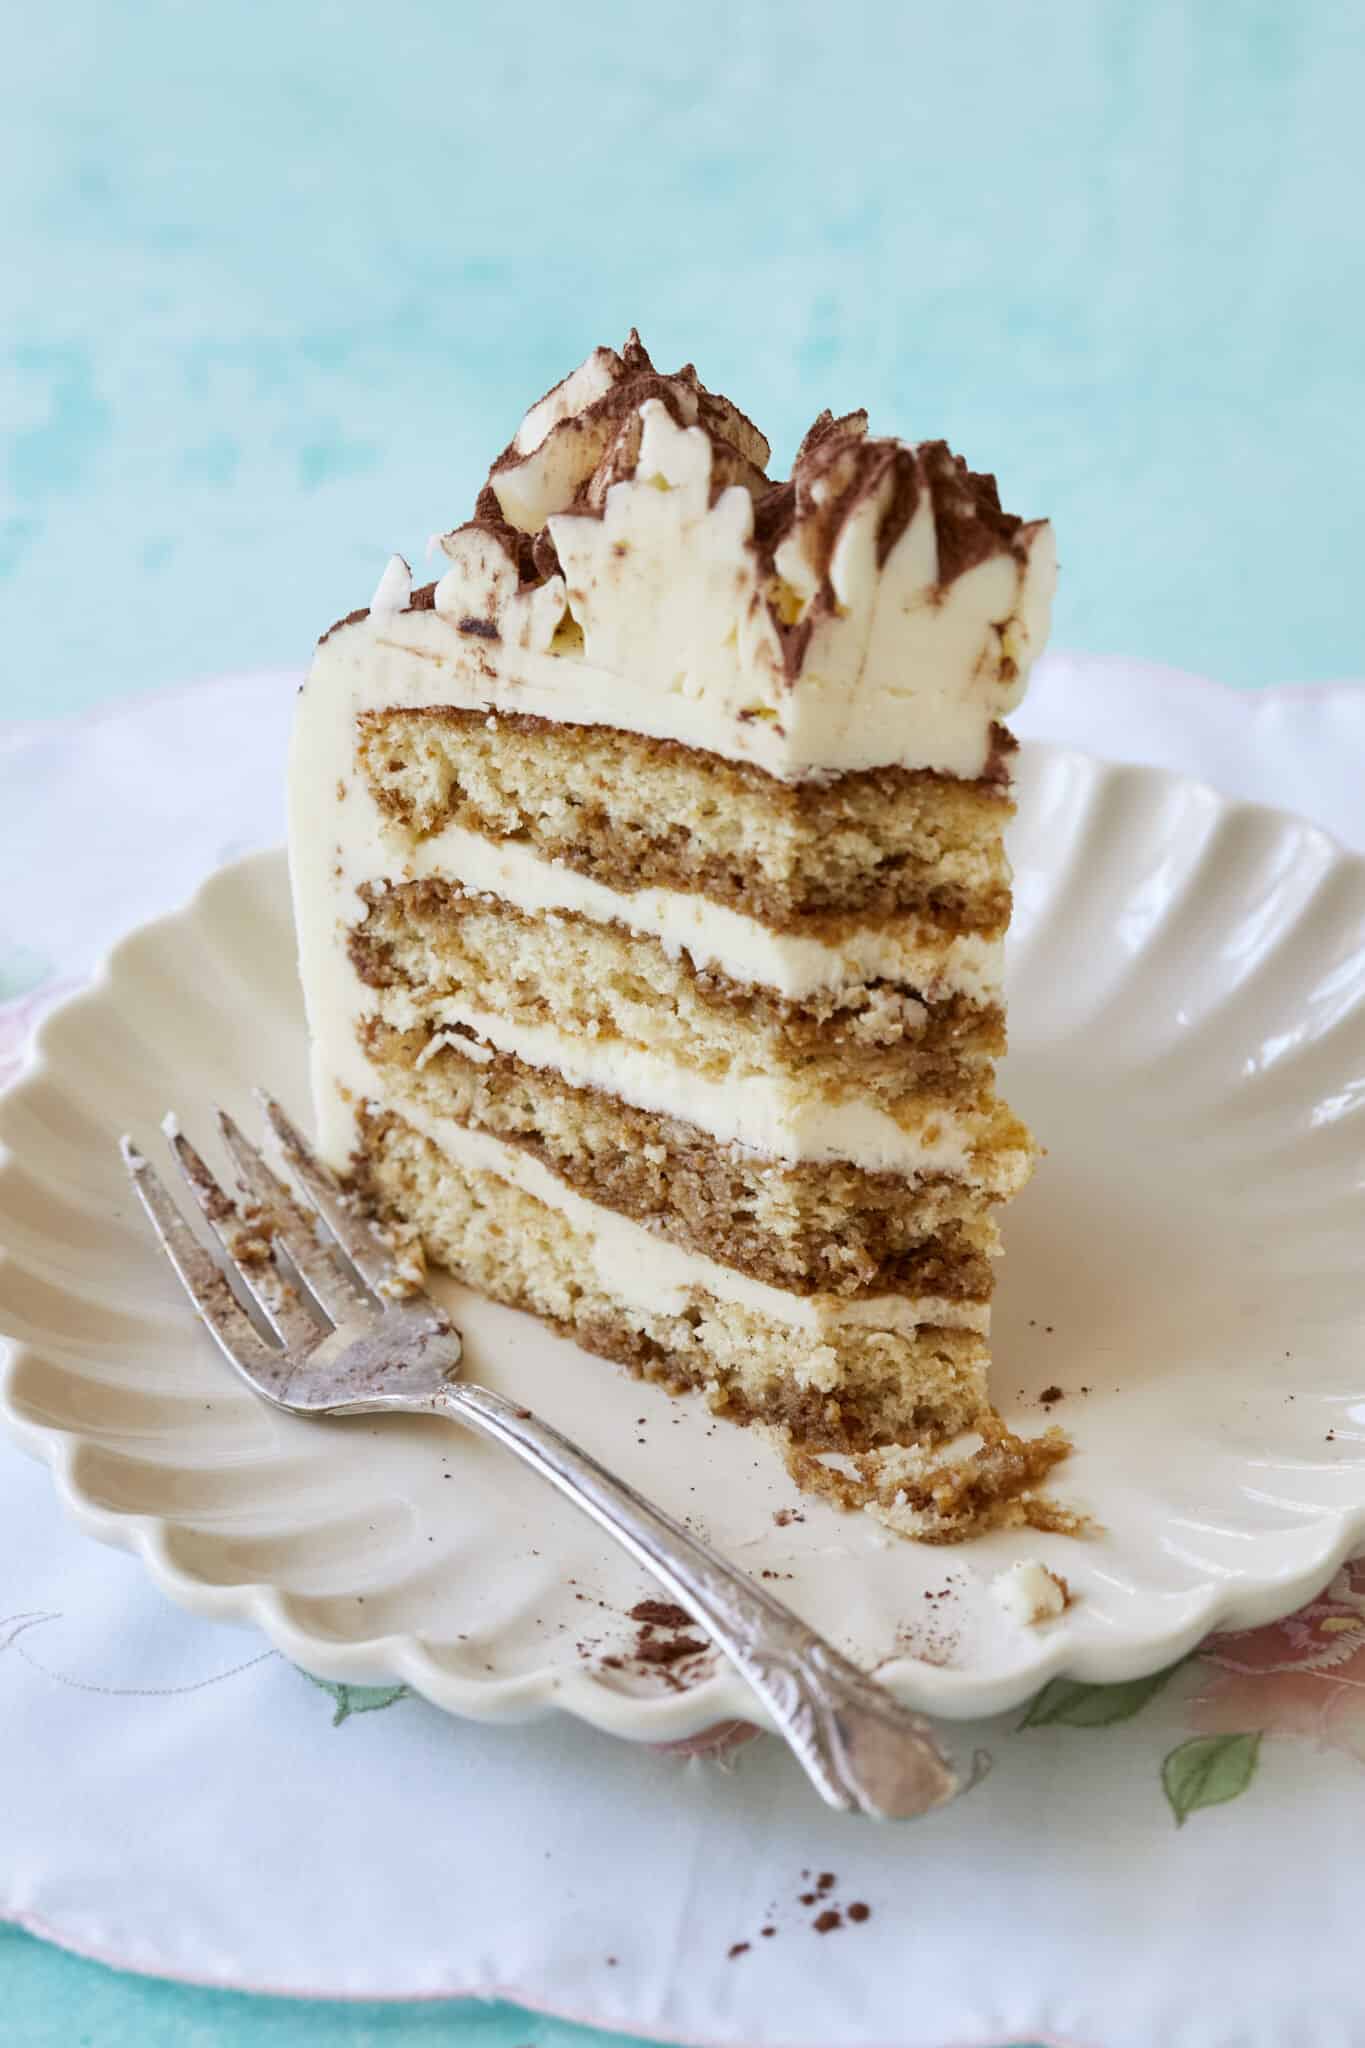 The close-up shot at a slice of the Stunning Tiramisu Cake served on a dessert plate shows its layers of coffee-soaked sponge cake filled with creamy mascarpone. This layered tiramisu cake is topped with rosettes and dusted cocoa which makes it visually appealing. 